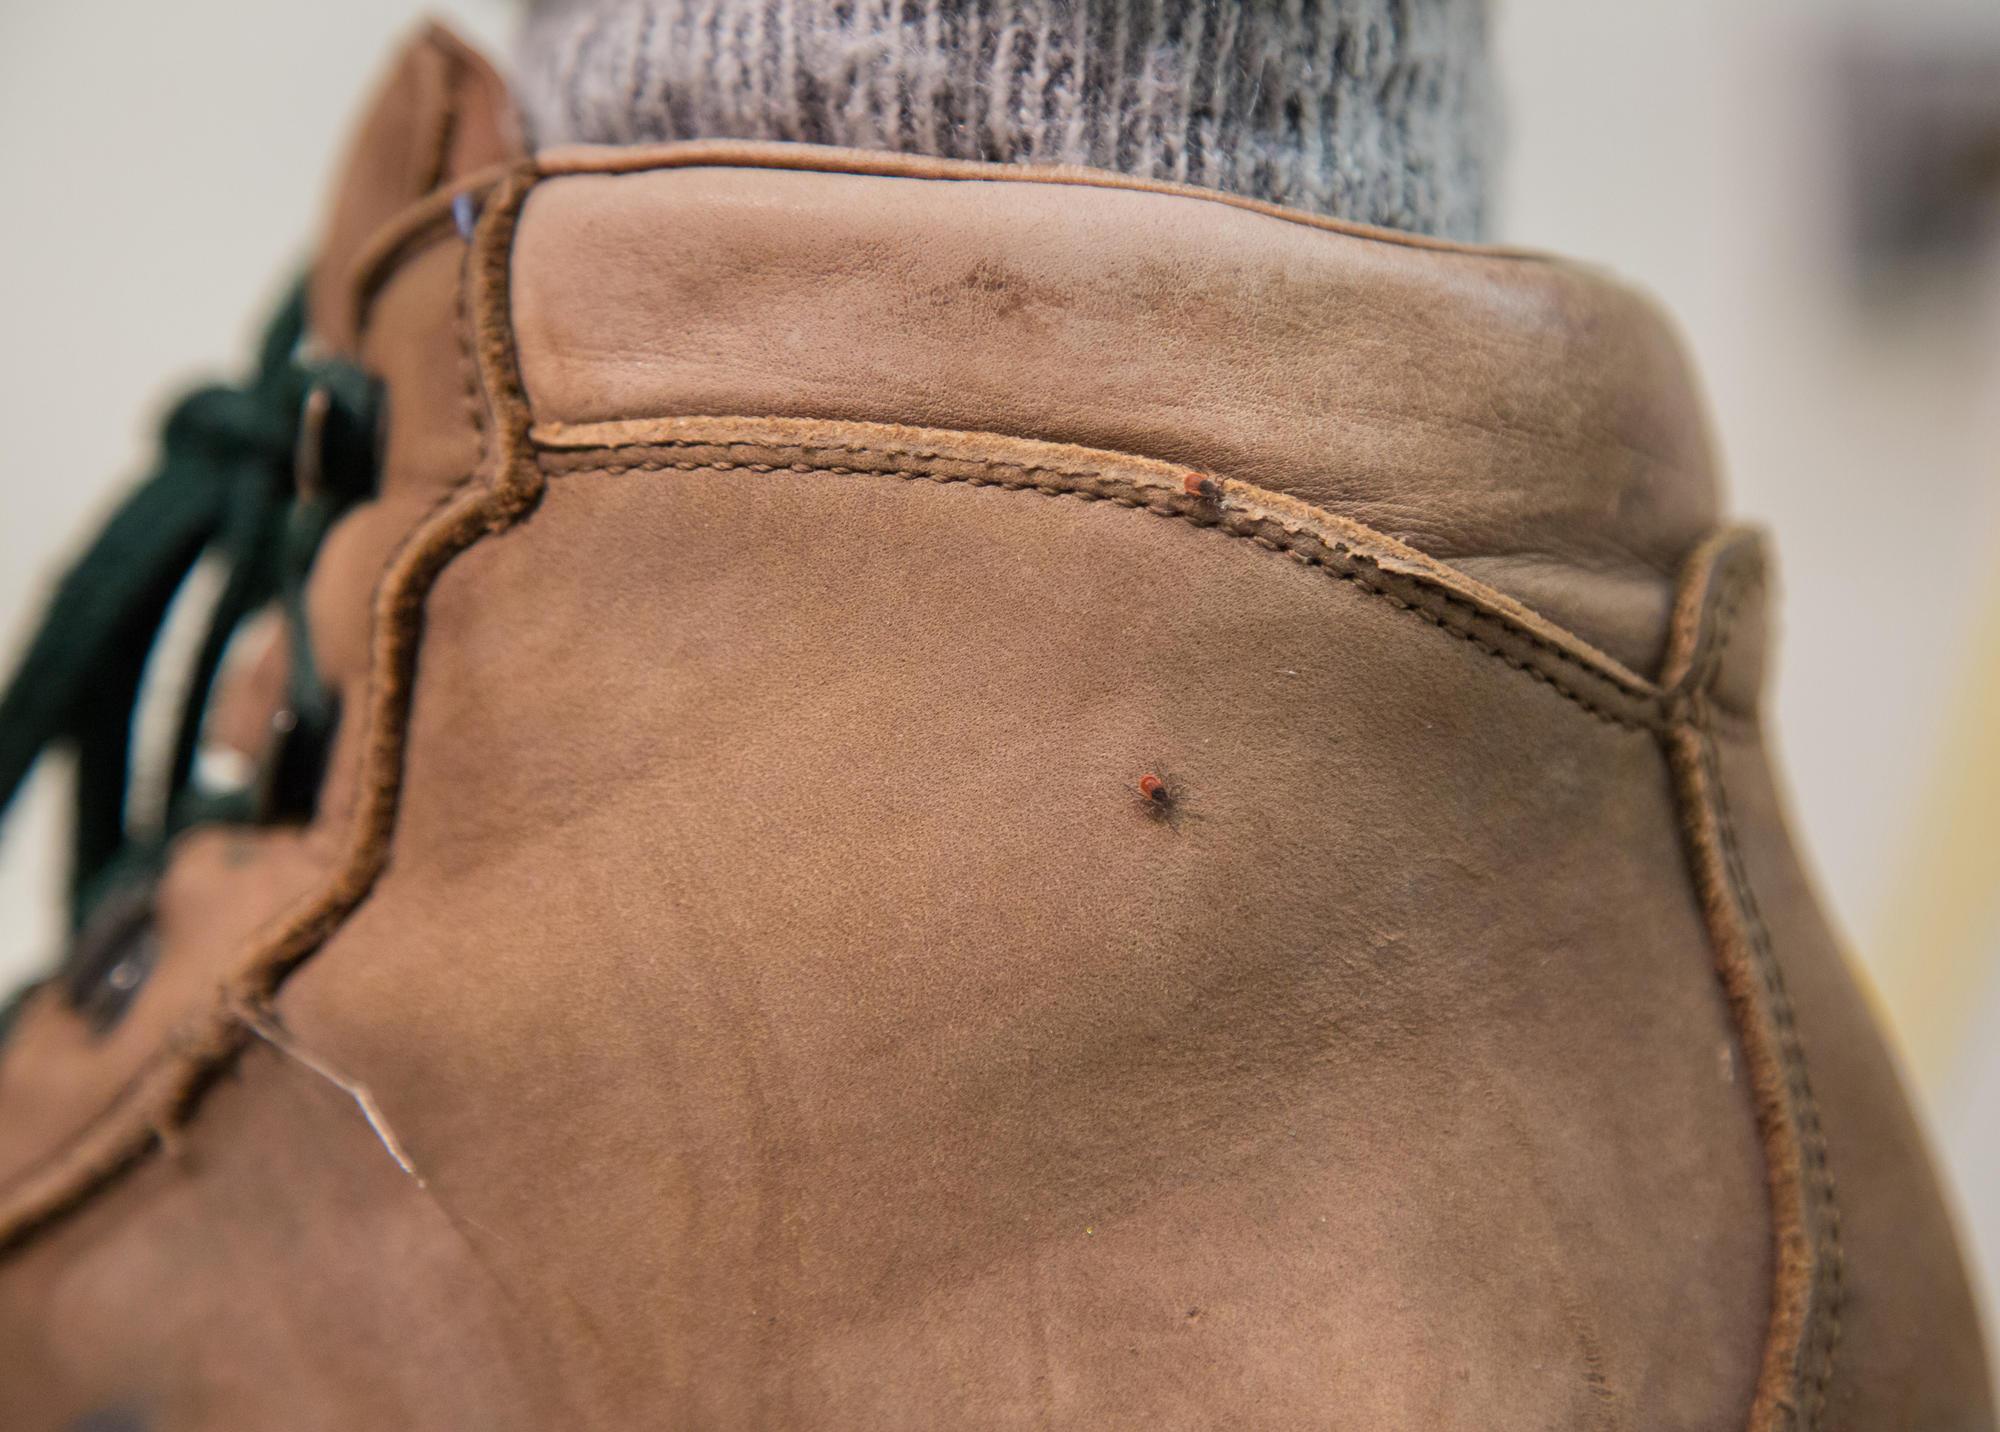 Two adult female blacklegged ticks on a hiking boot, to illustrate scale.